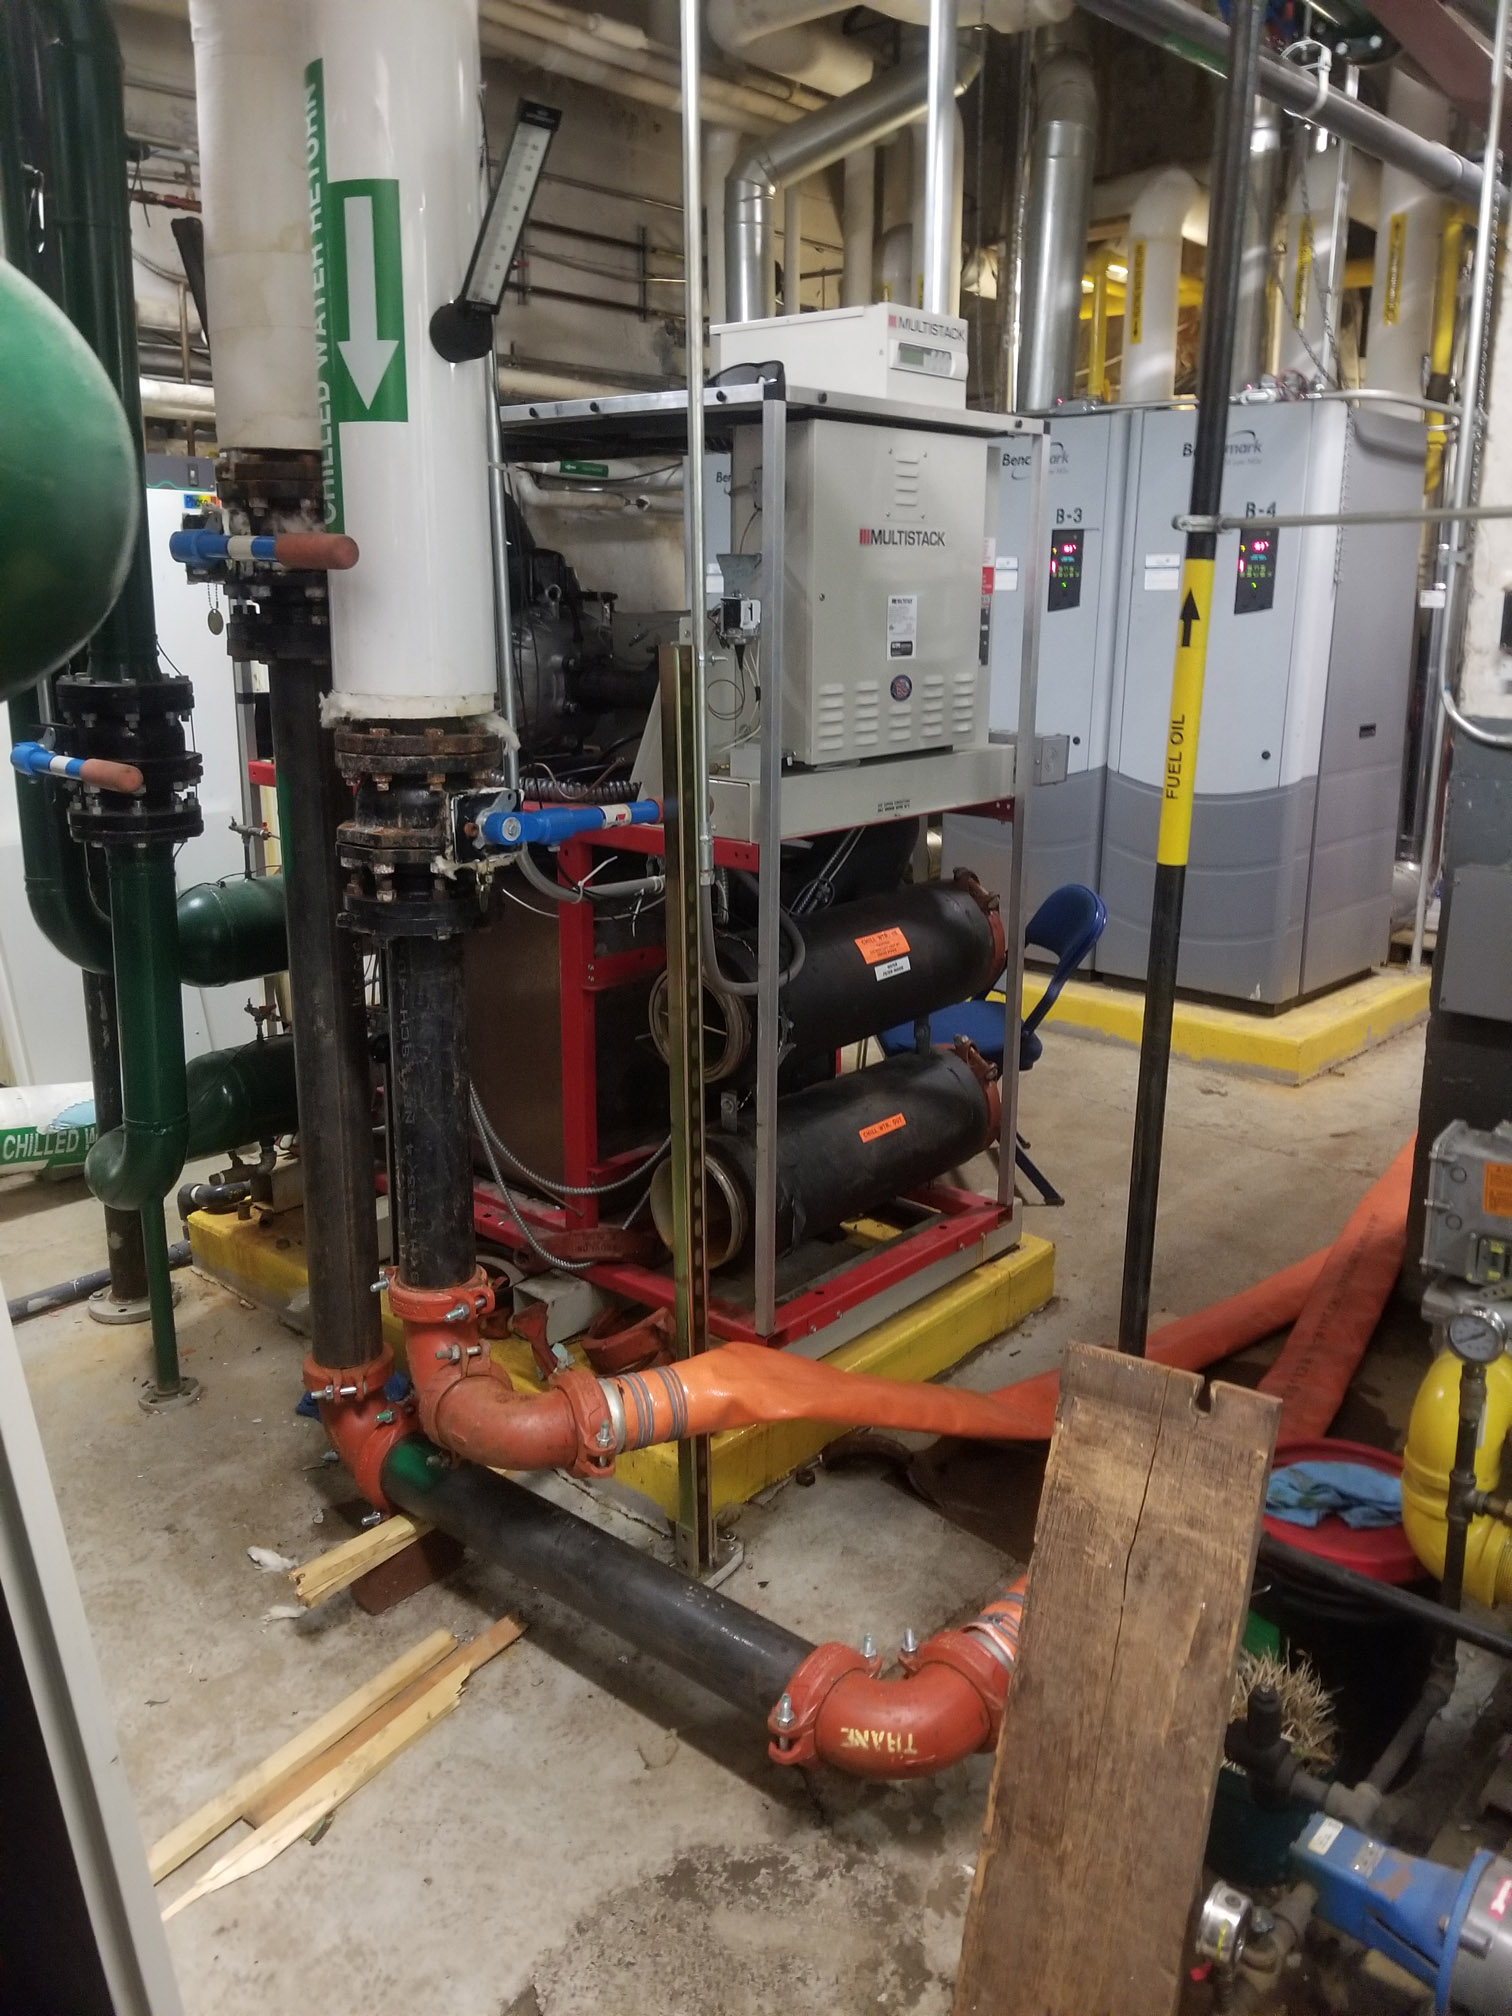 Air Cooled Chiller Rental Bay County FL, Chiller AC Rental Bay County FL, Temporary Chiller Bay County FL, Rental Chiller Installation Bay County FL